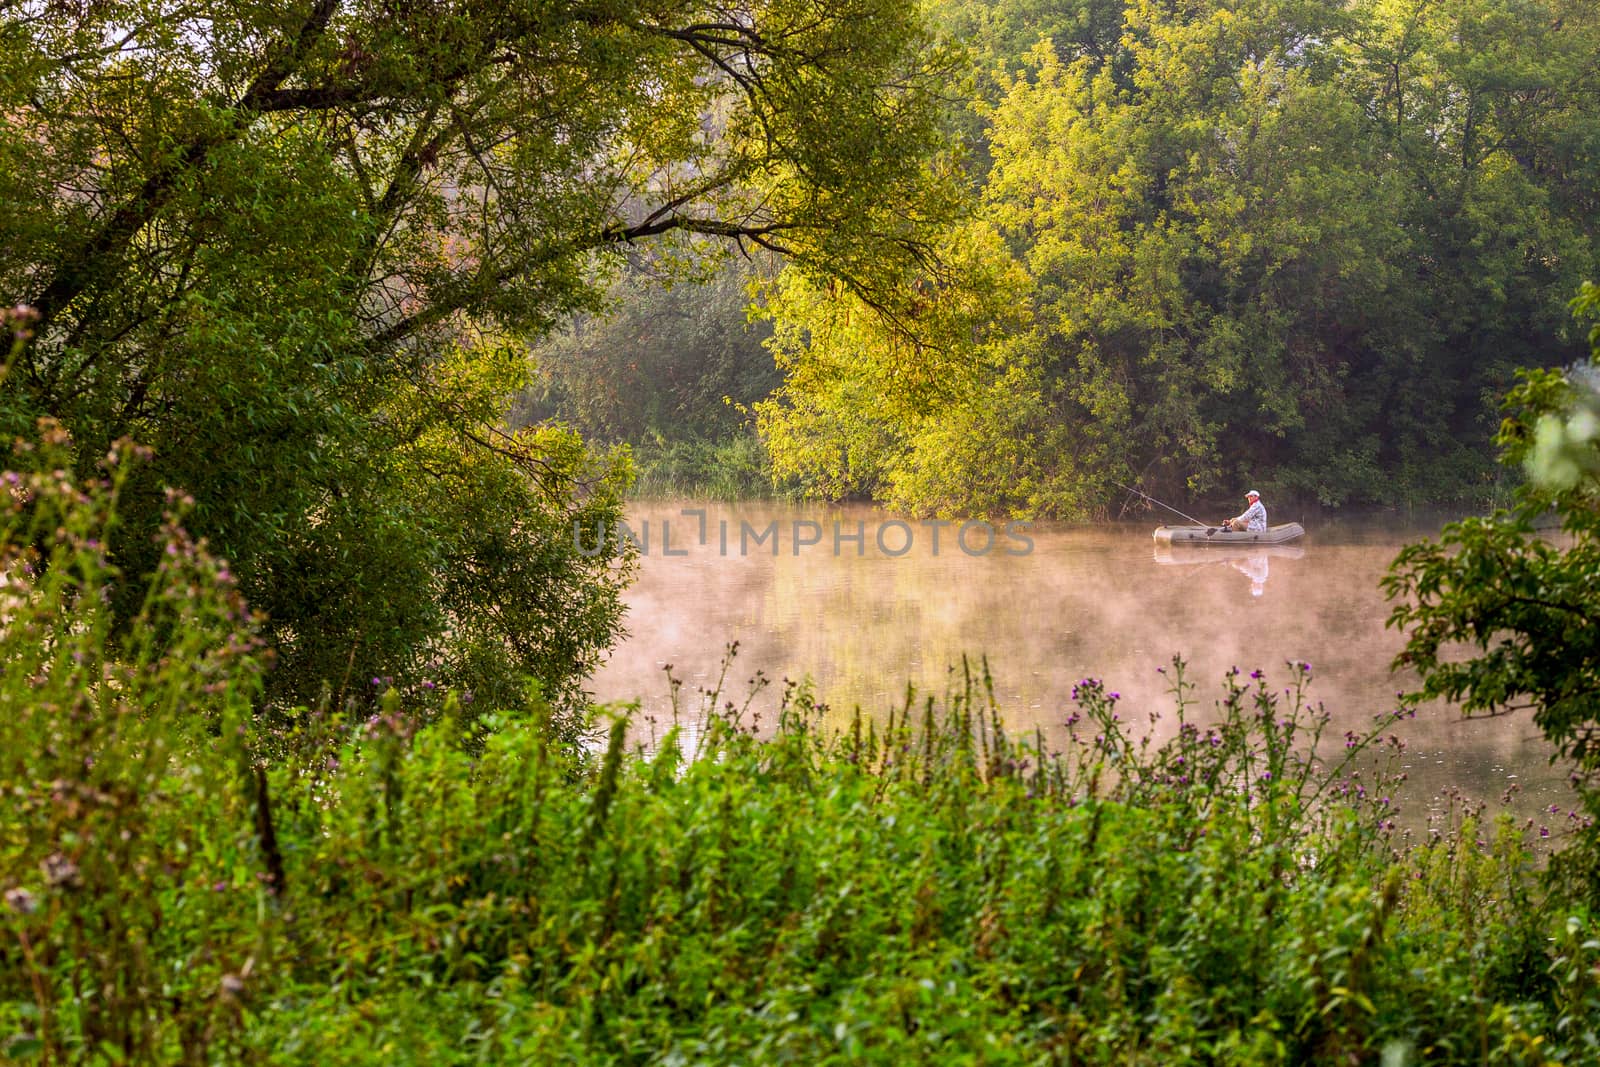 TULA, RUSSIA - AUGUST 12, 2013: A man fishing on river at inflatable boat at foggy summer morning surrounded by green foliage. Selective focus telephoto shot from coast.